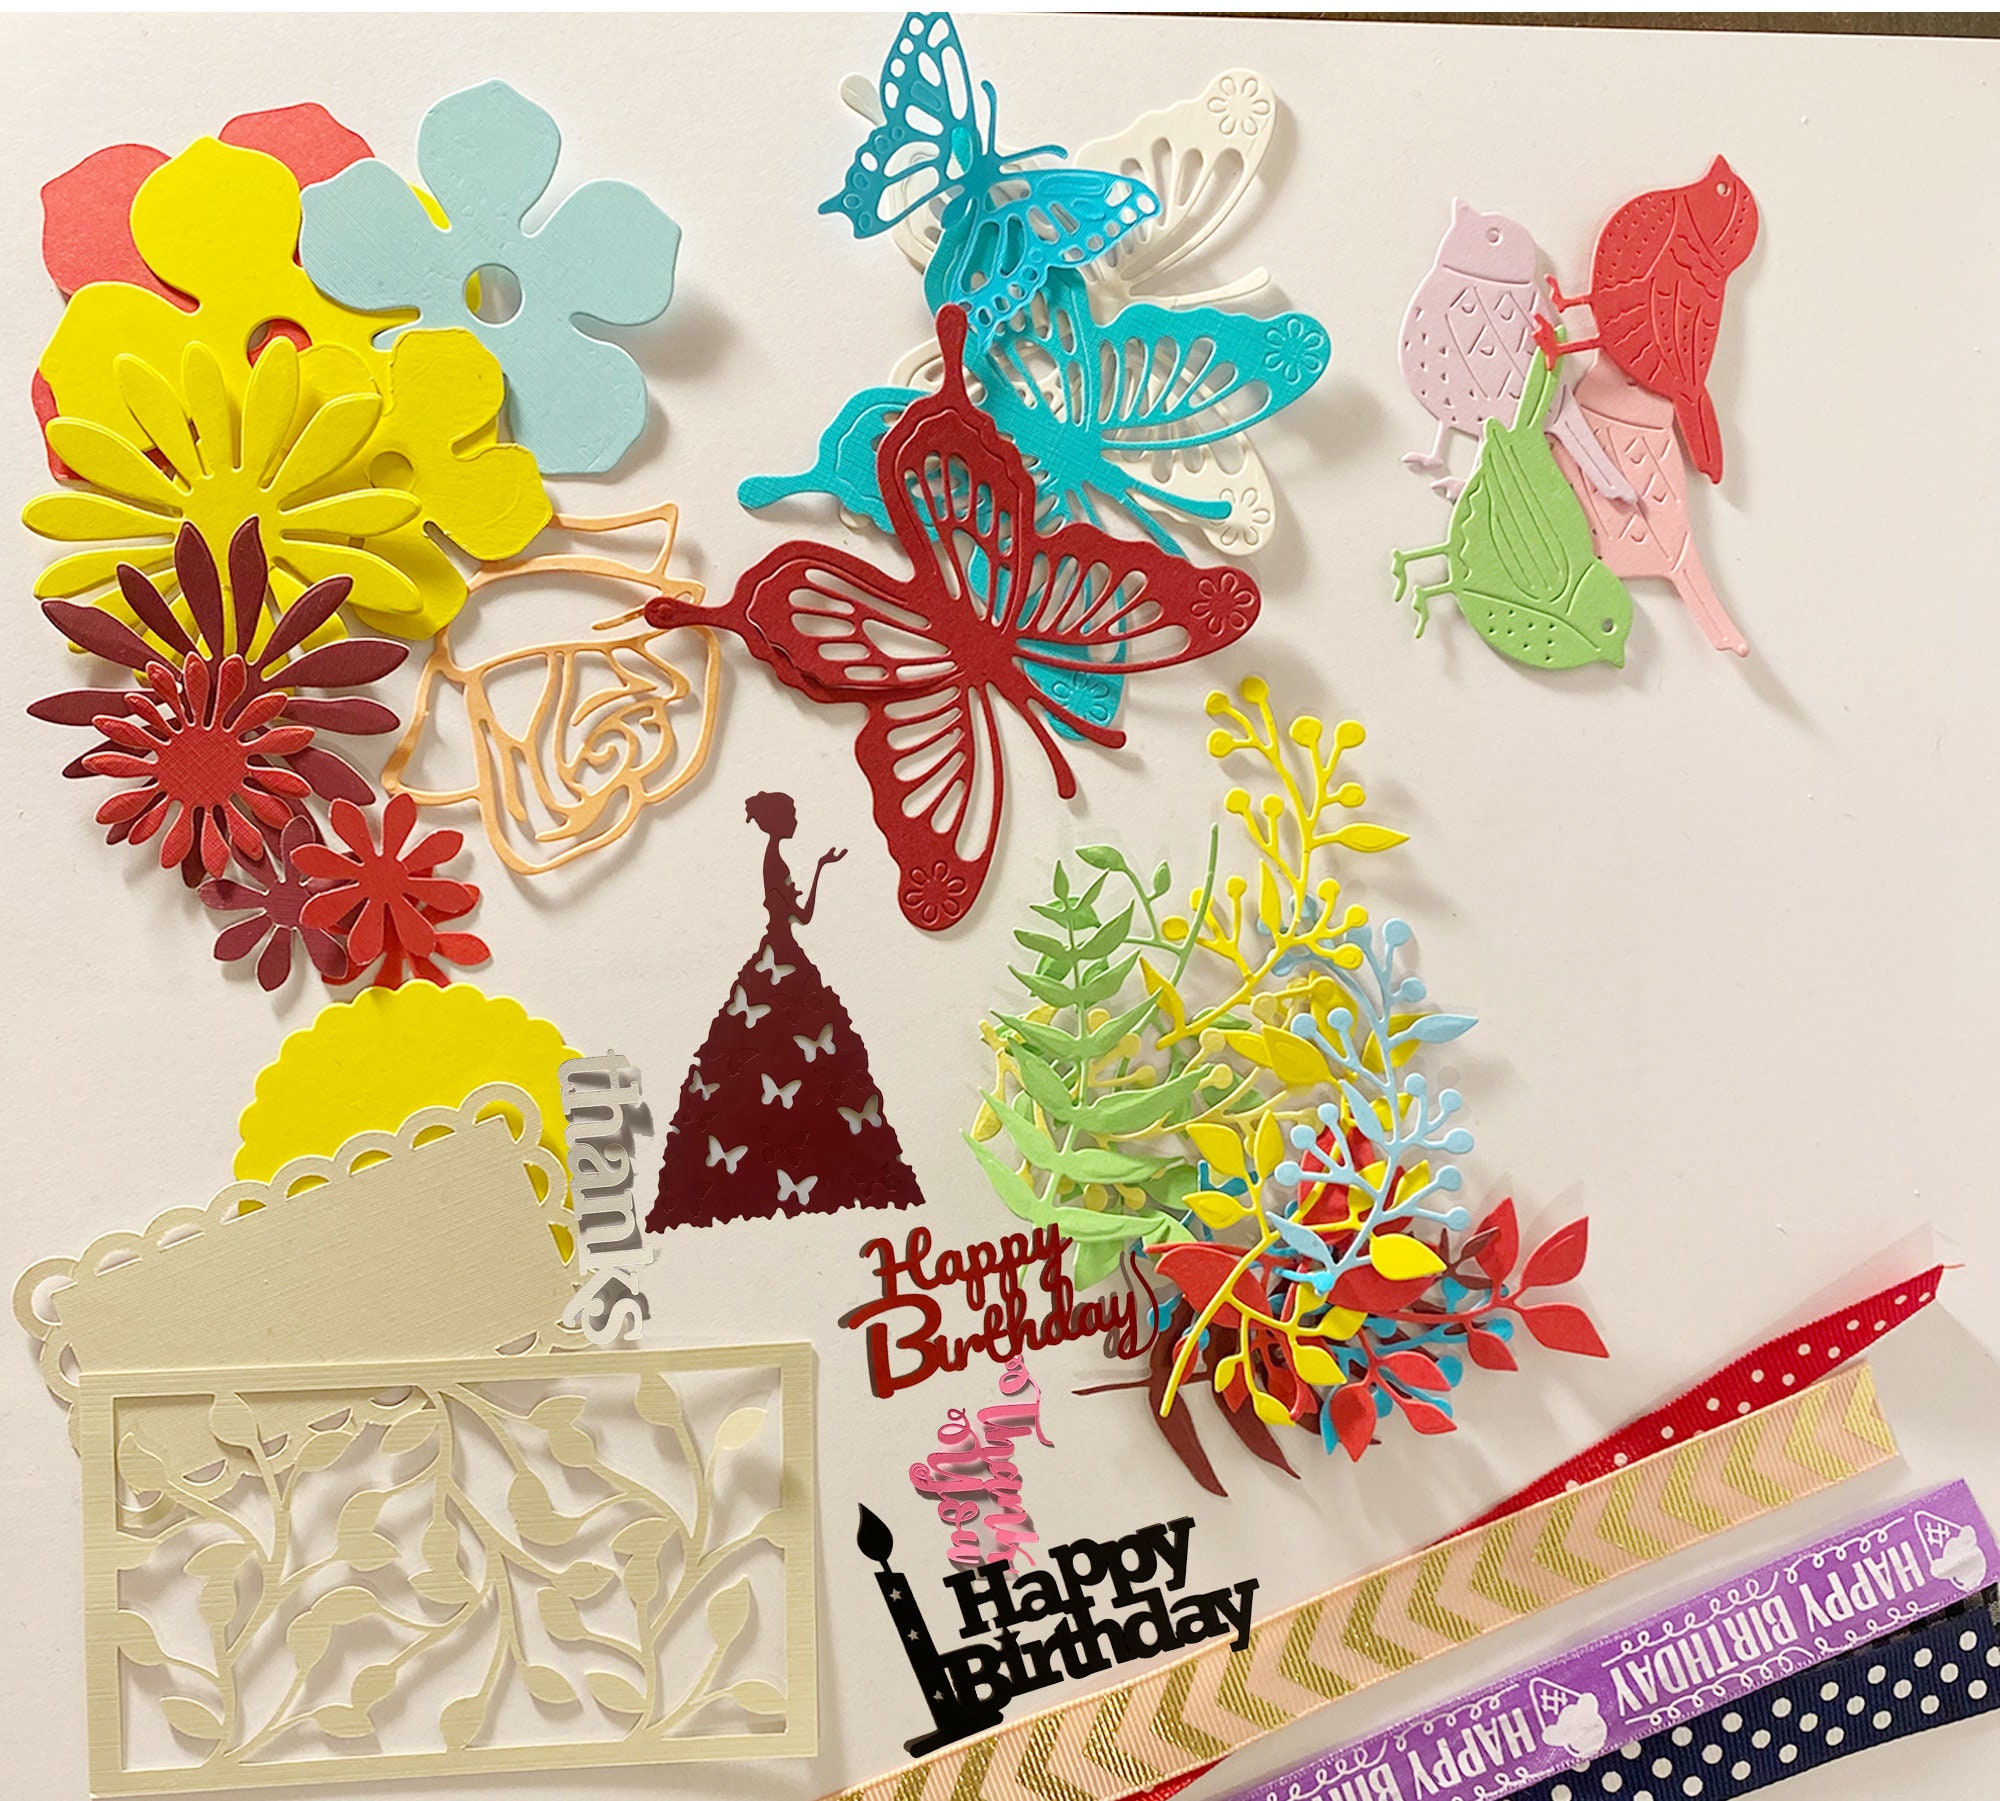 Card Making Kit for Kids and Adult, Craft Kit for Kids, Teen and